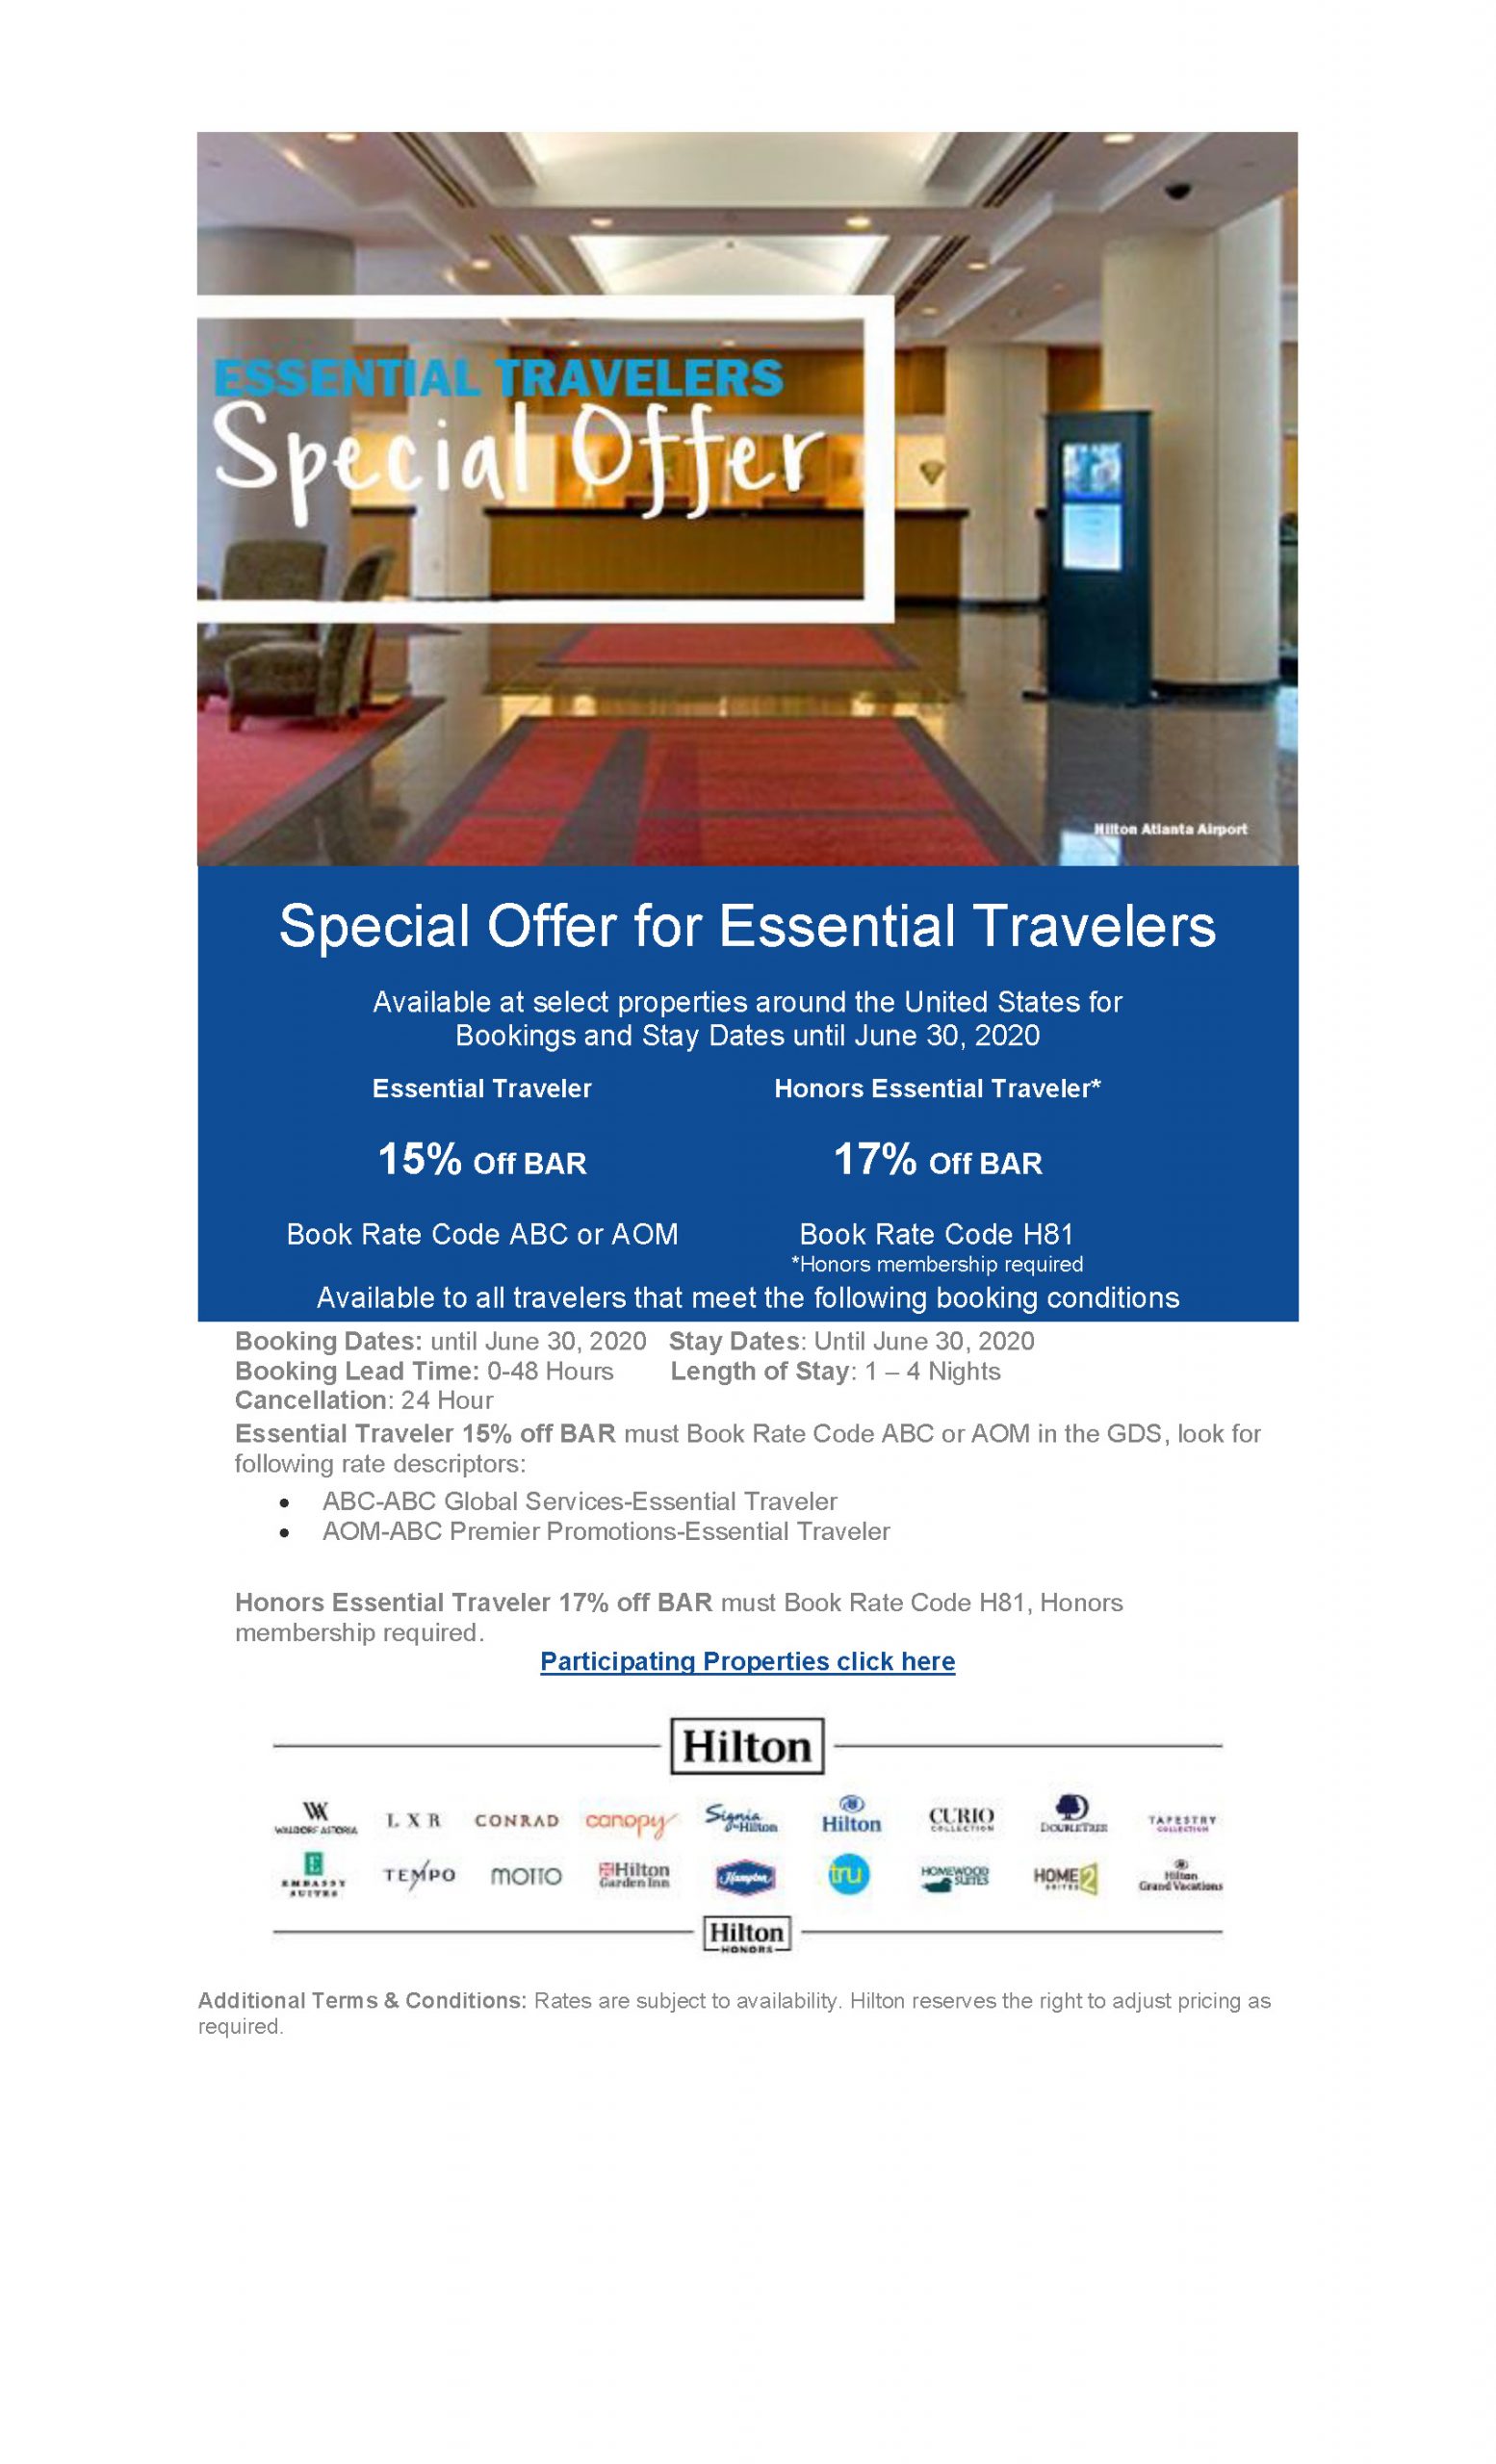 hilton hotel travel agent offers